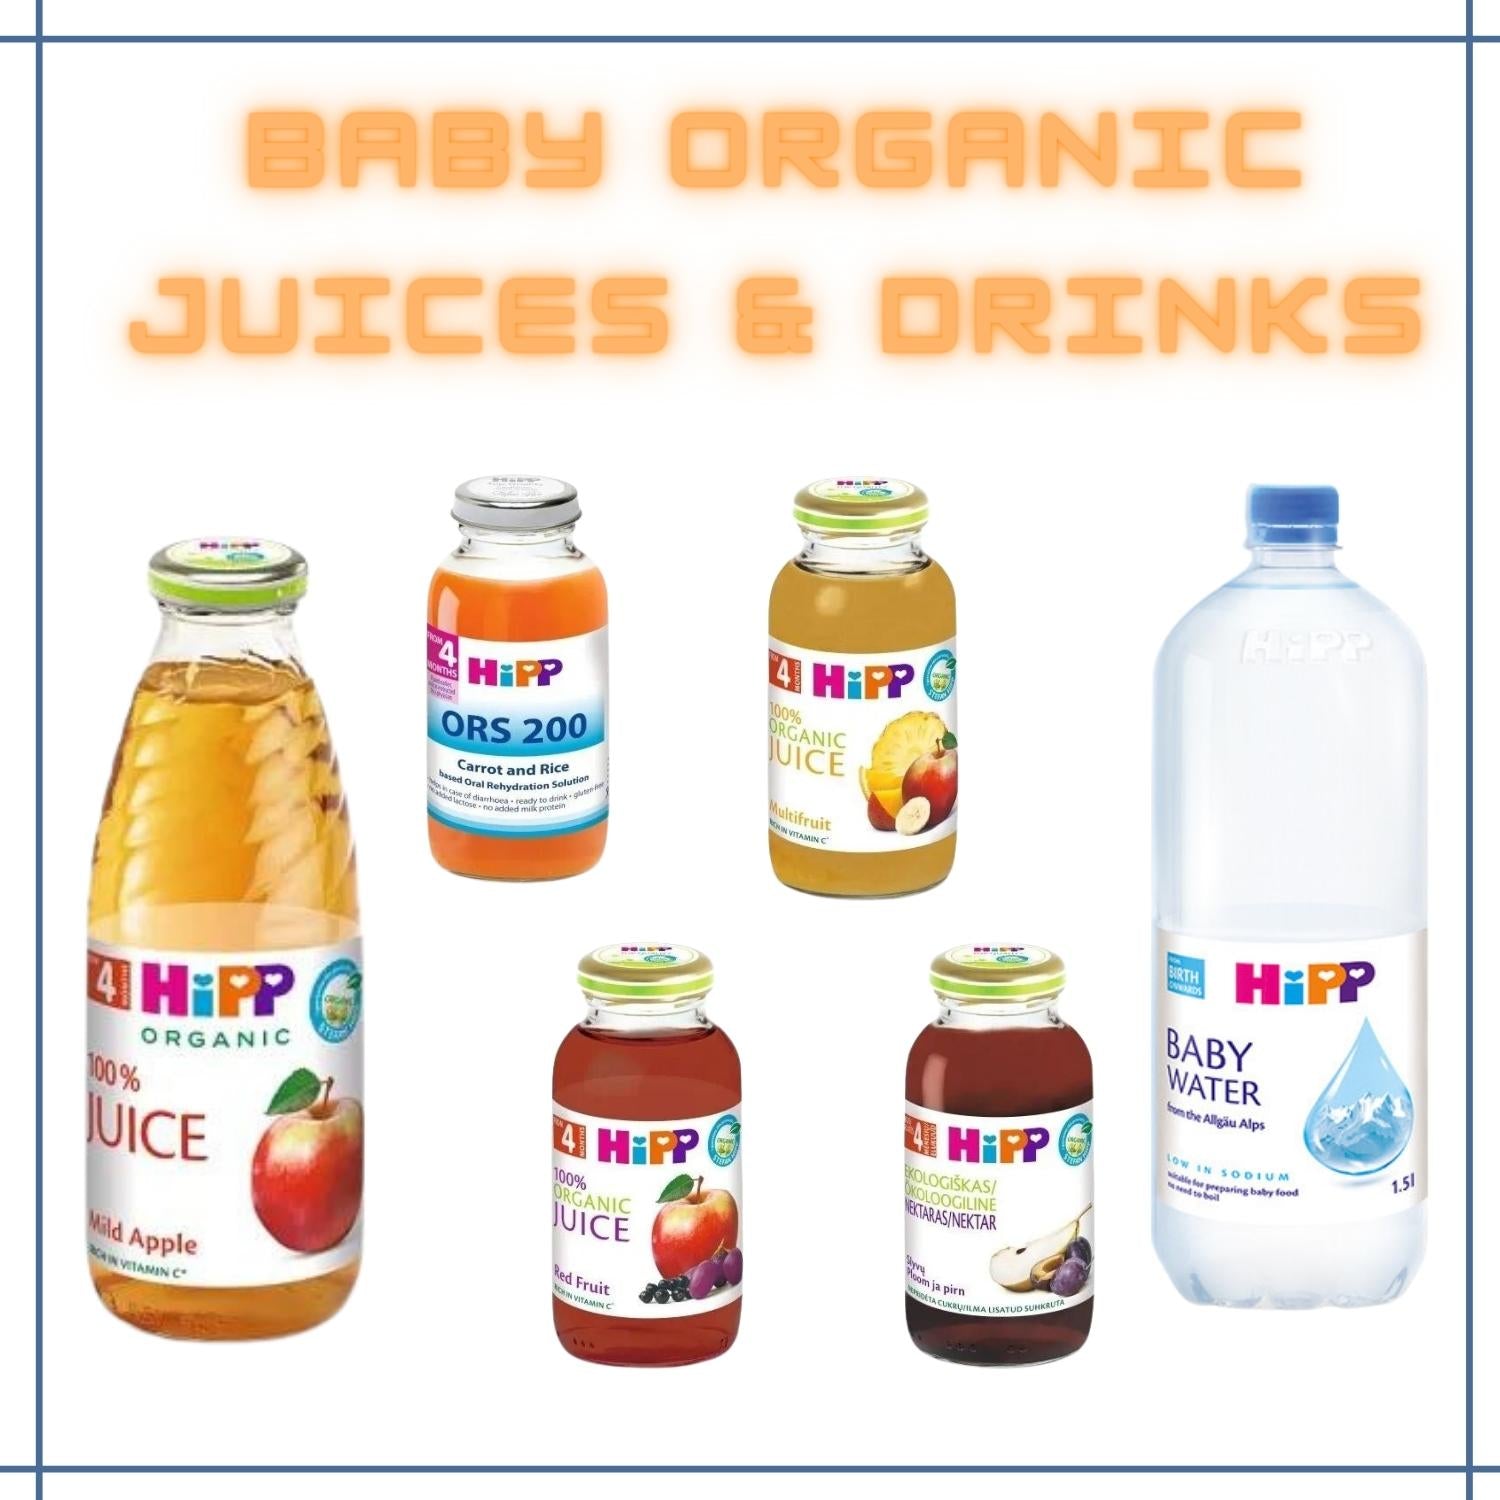 Baby Organic Juices and Drinks